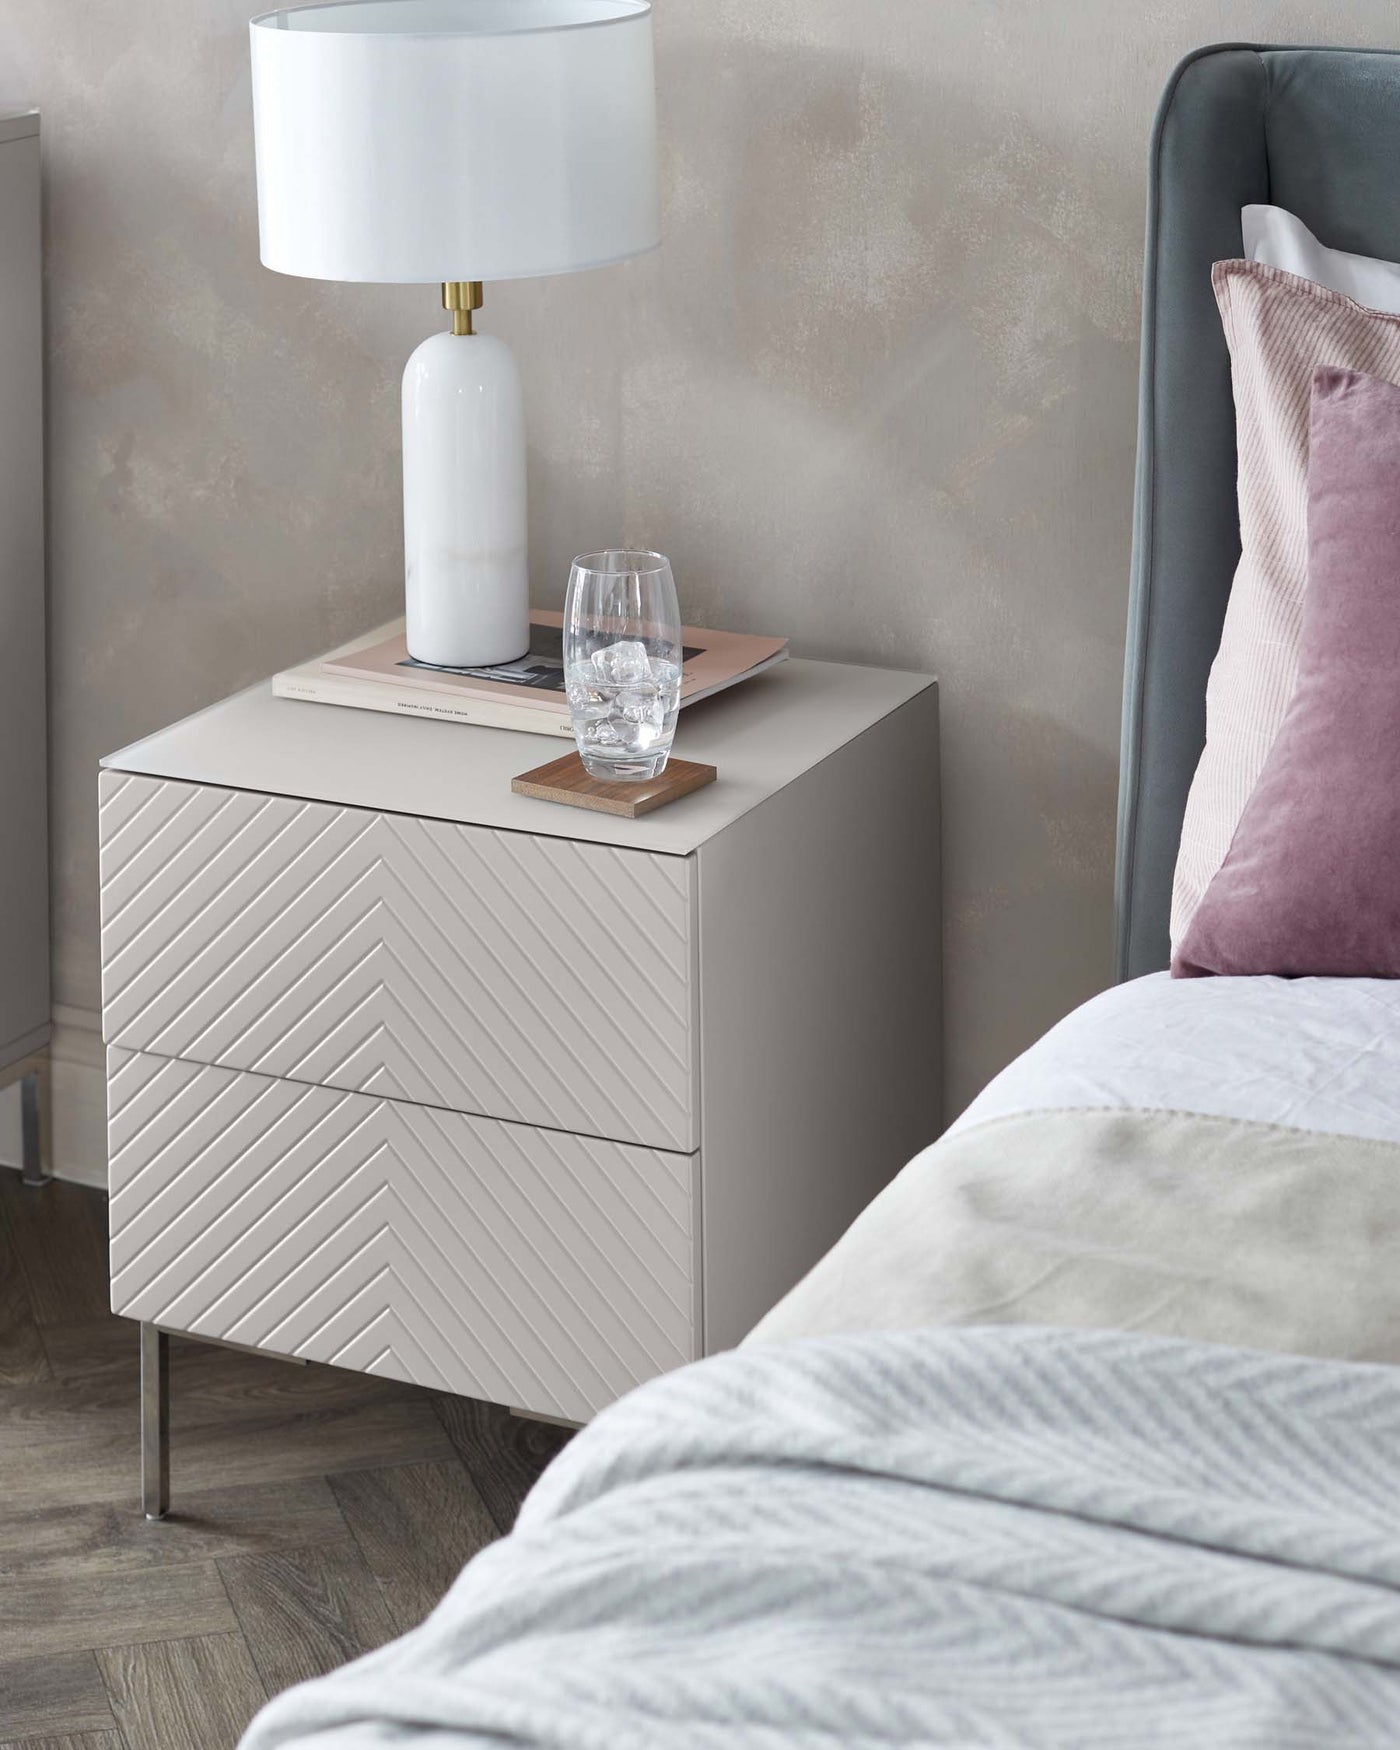 Modern light grey bedside table with chevron-patterned drawers and metal legs, accompanied by a white cylindrical lamp with a gold accent on top.